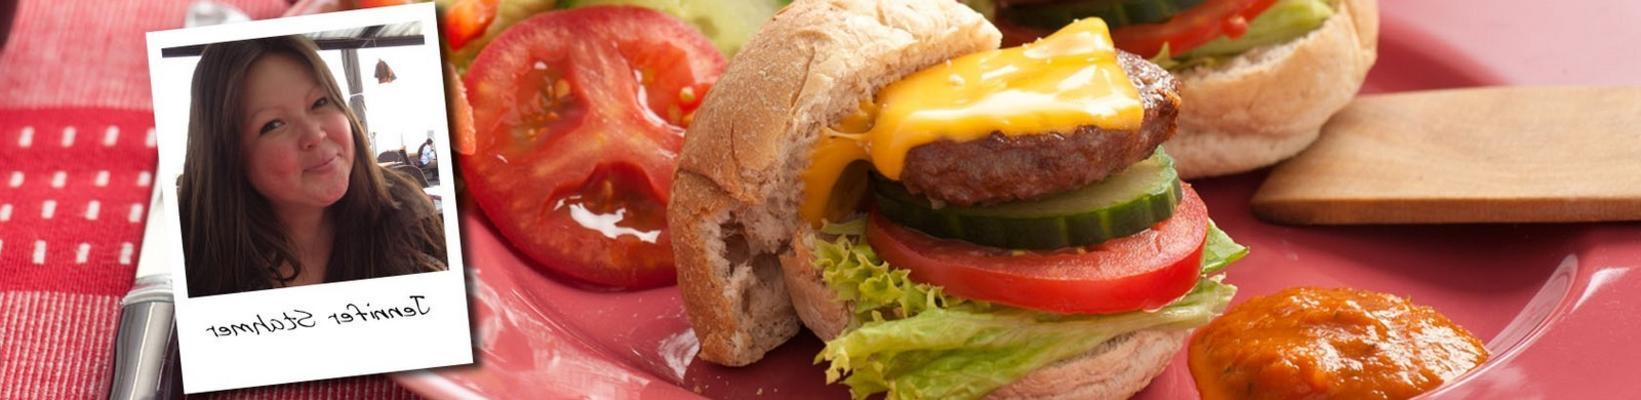 american burger with marinade from jennifer stahmer